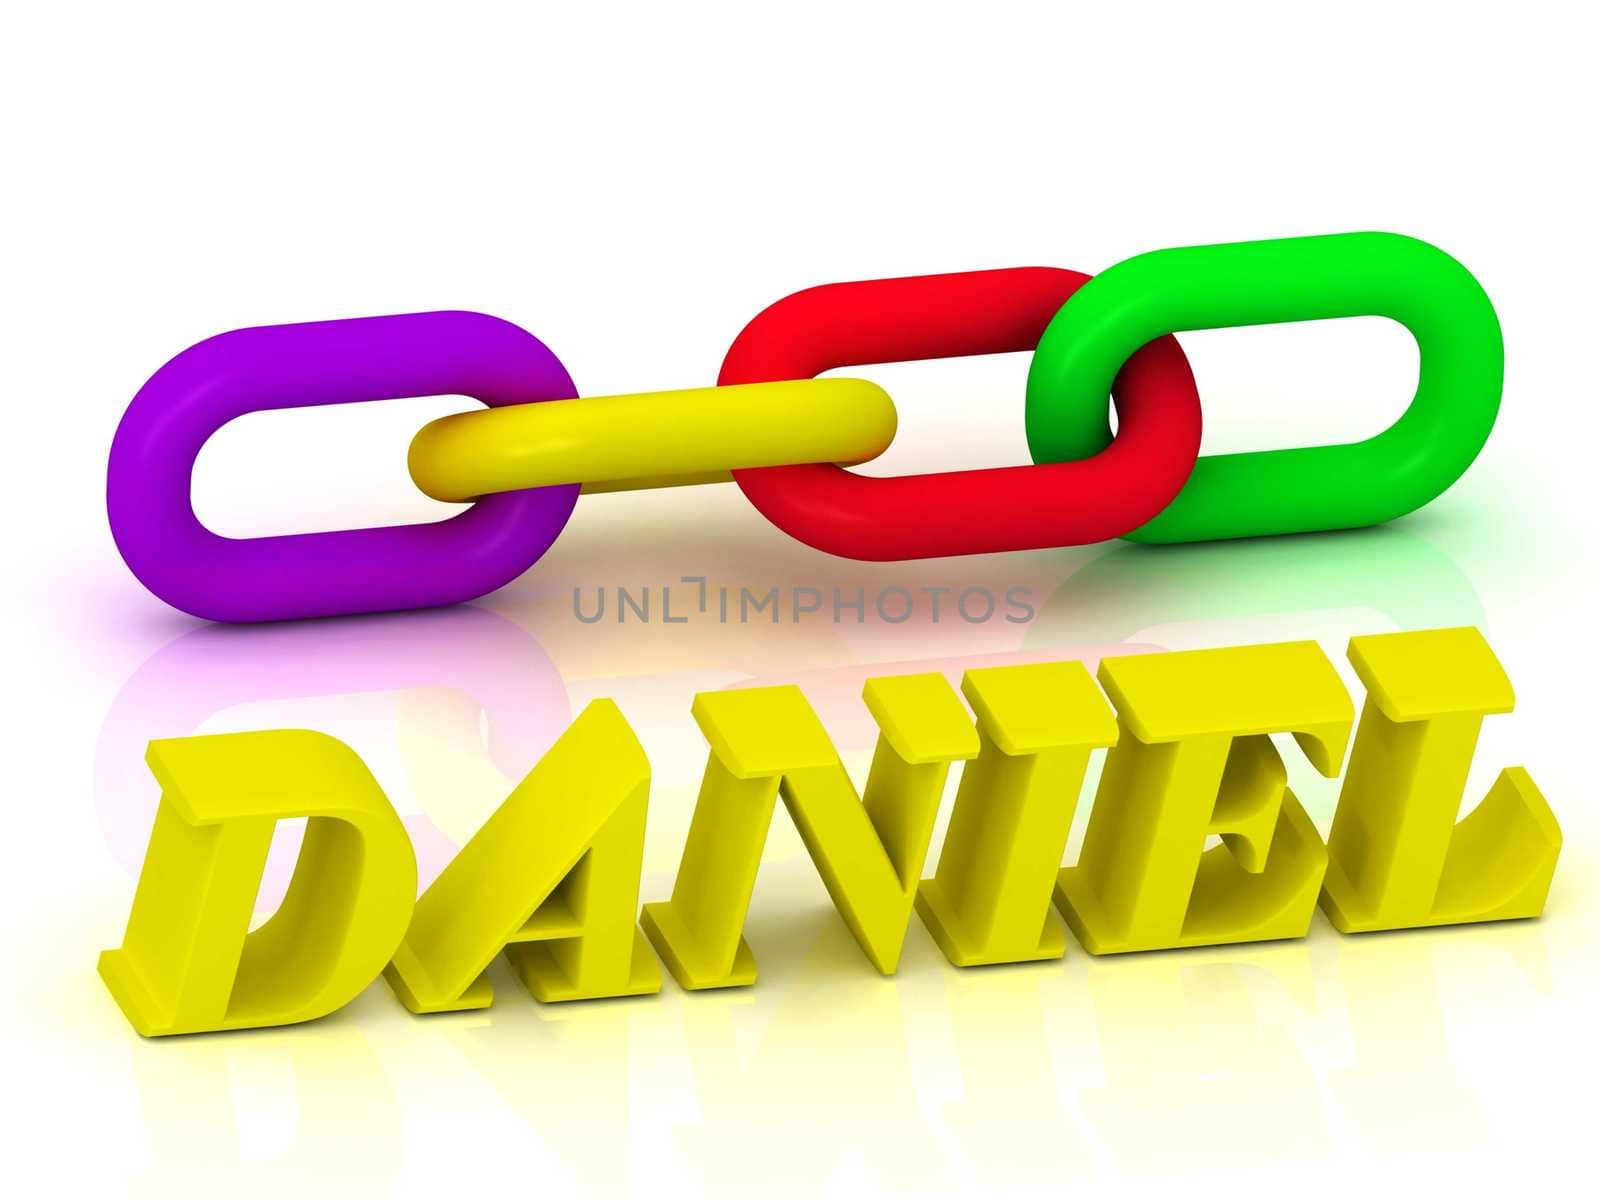 DANIEL- Name and Family of bright yellow letters by GreenMost